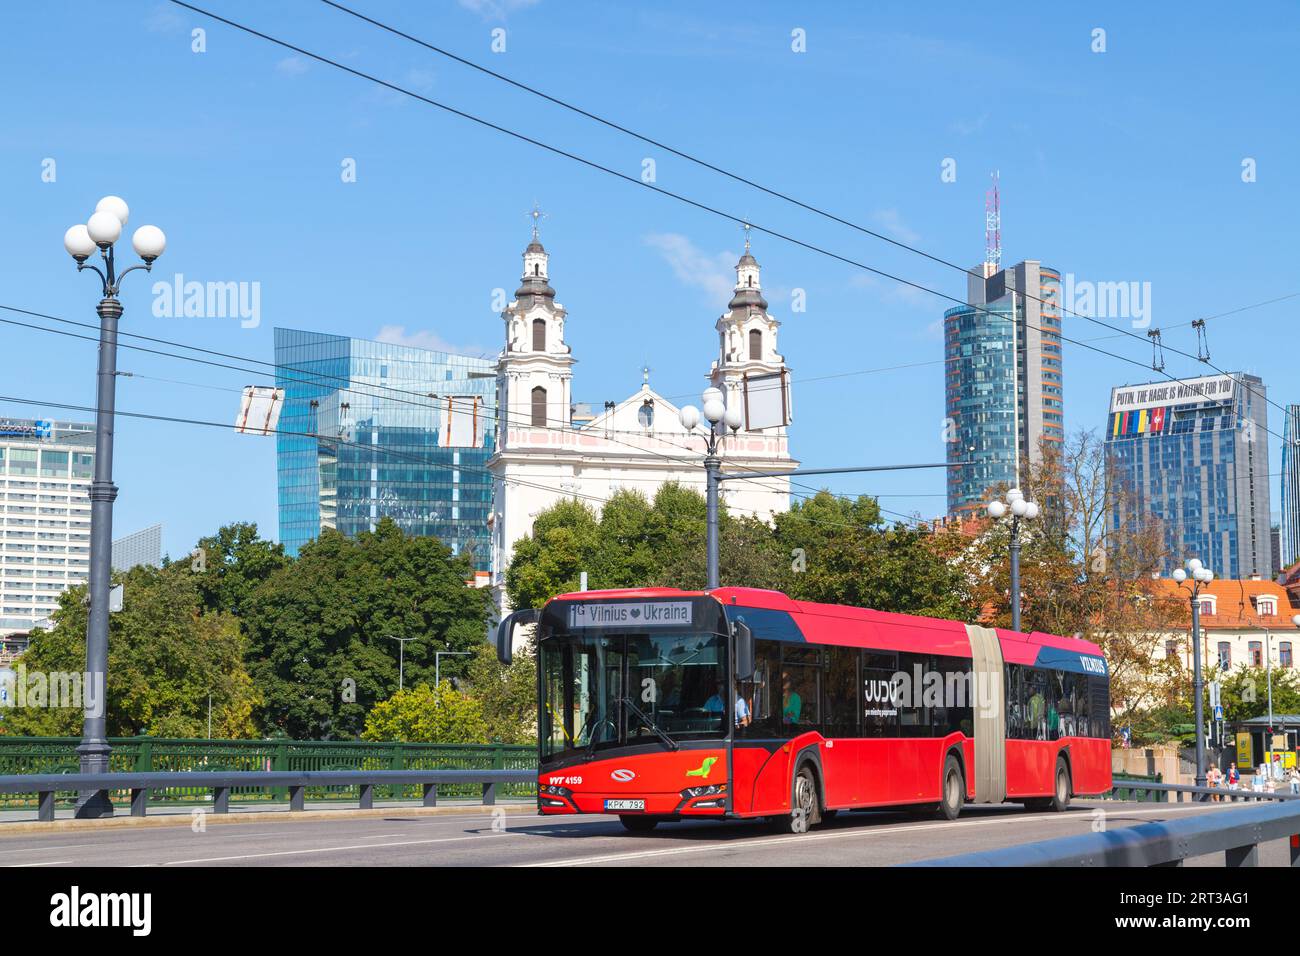 VILNIUS, LITHUANIA - 3RD SEPT 2023: A common red public transportation bus in Vilnius during the day with architecture in the background. People can b Stock Photo